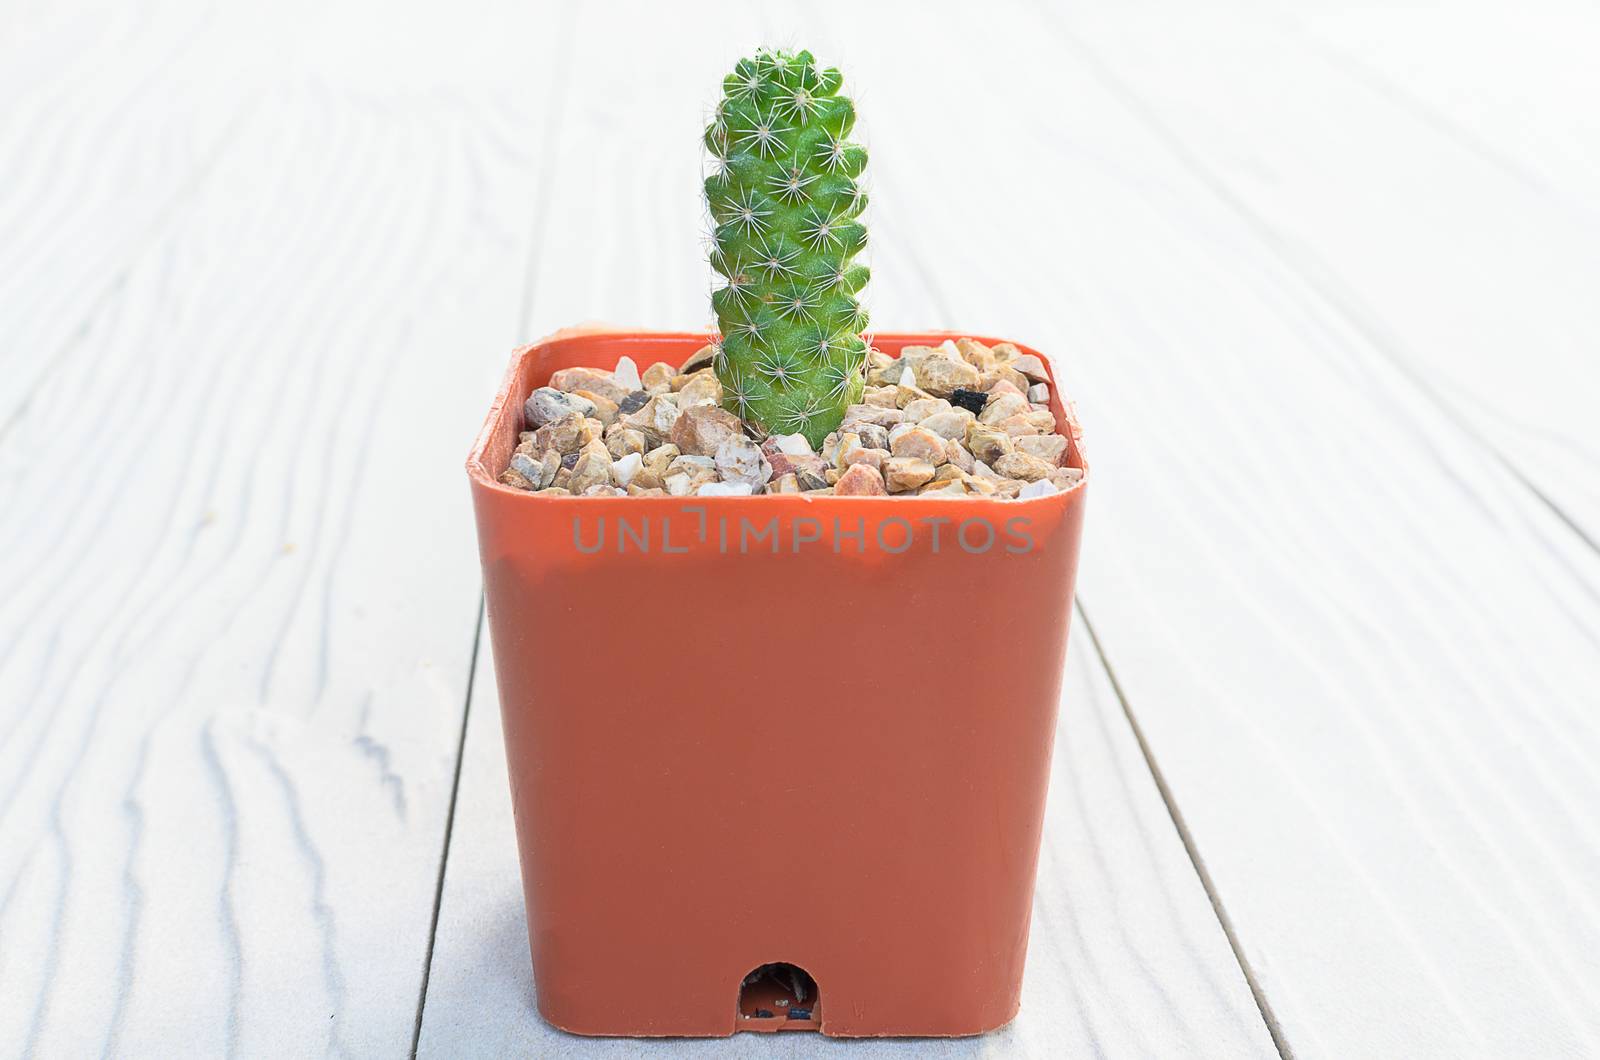 Cactus has growing up on Vintage Wood Background Texture